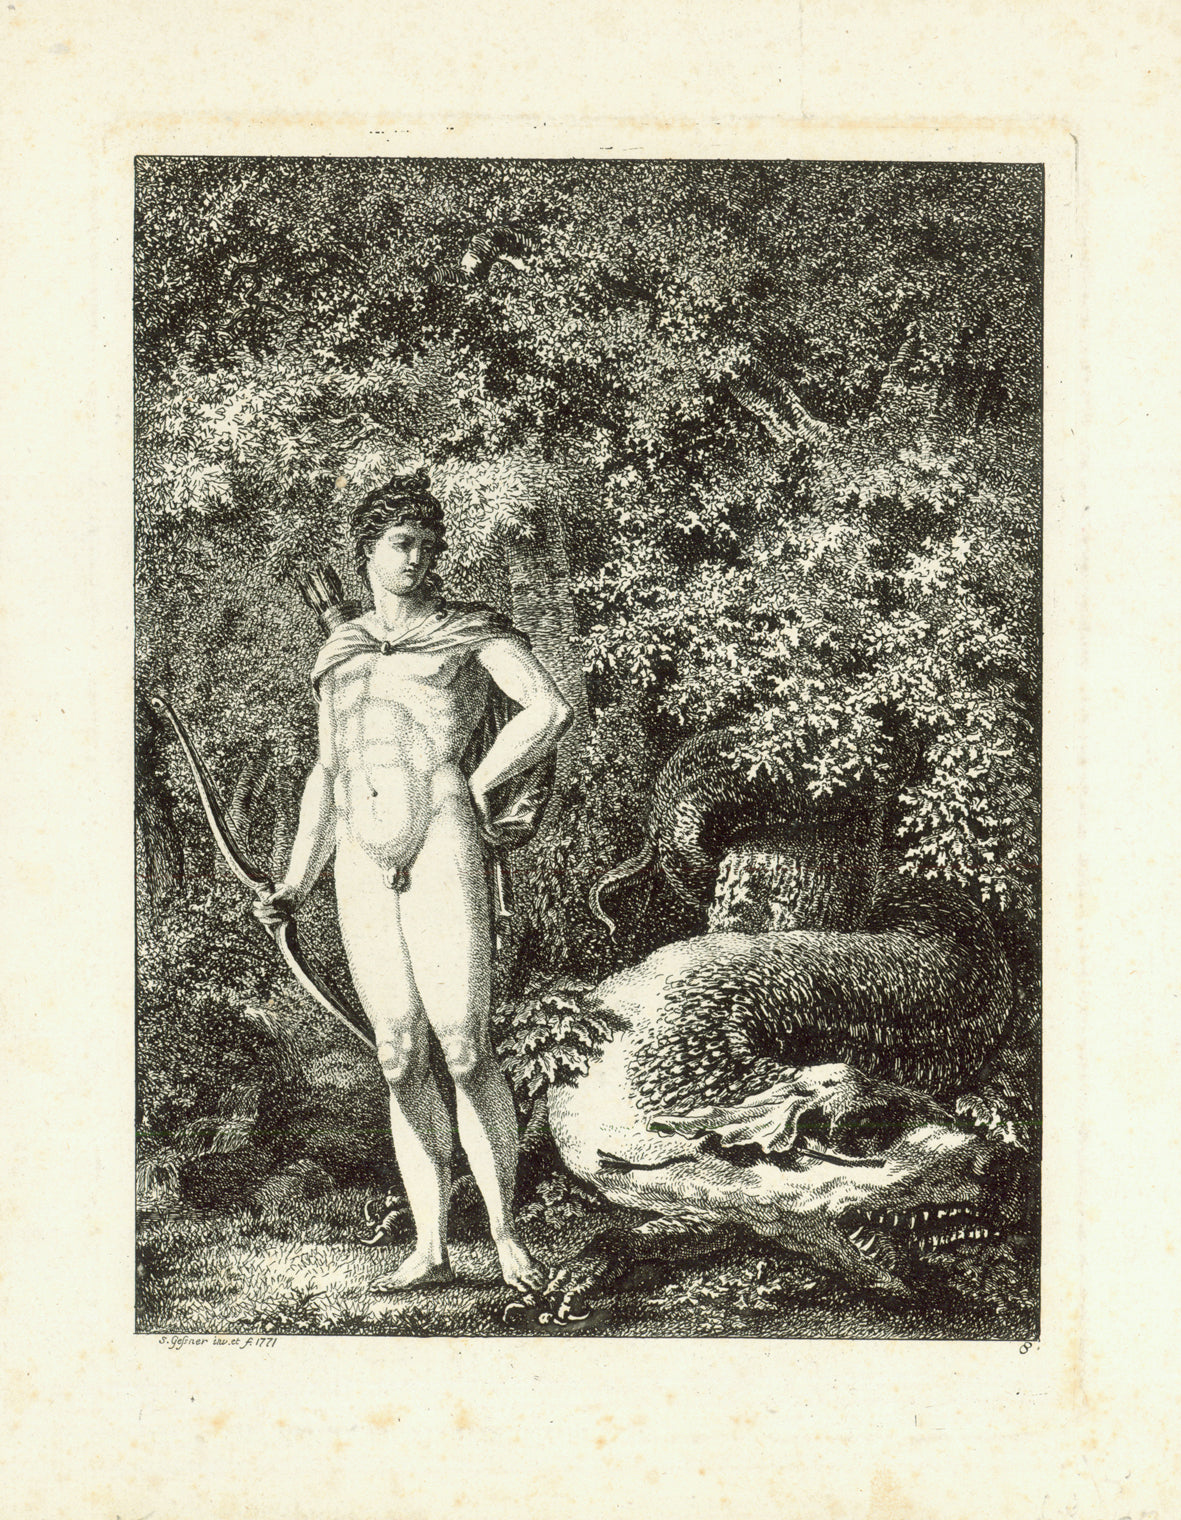 No title. Apollo, with bow and arrows, prepared to kill the fierce dragon.  This narrative of Greek / Roman mythology is described by Homer and, in variation, by Ovid.  Stipple copper etching by Salomon Gessner (1730-1788) after his own drawing.  Dated 1771